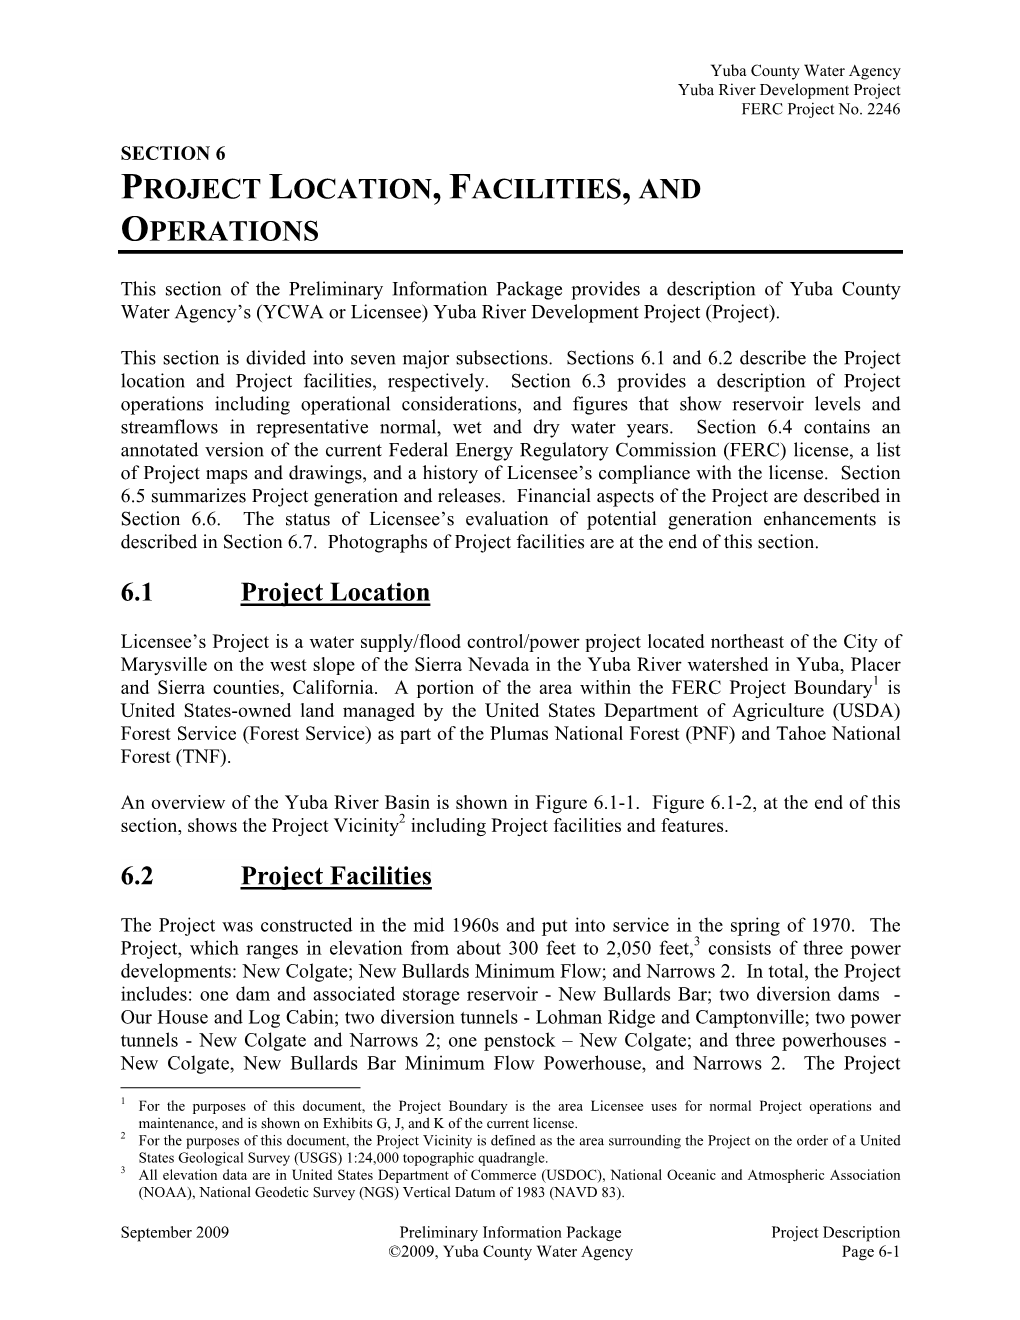 Project Location, Facilities, and Operations